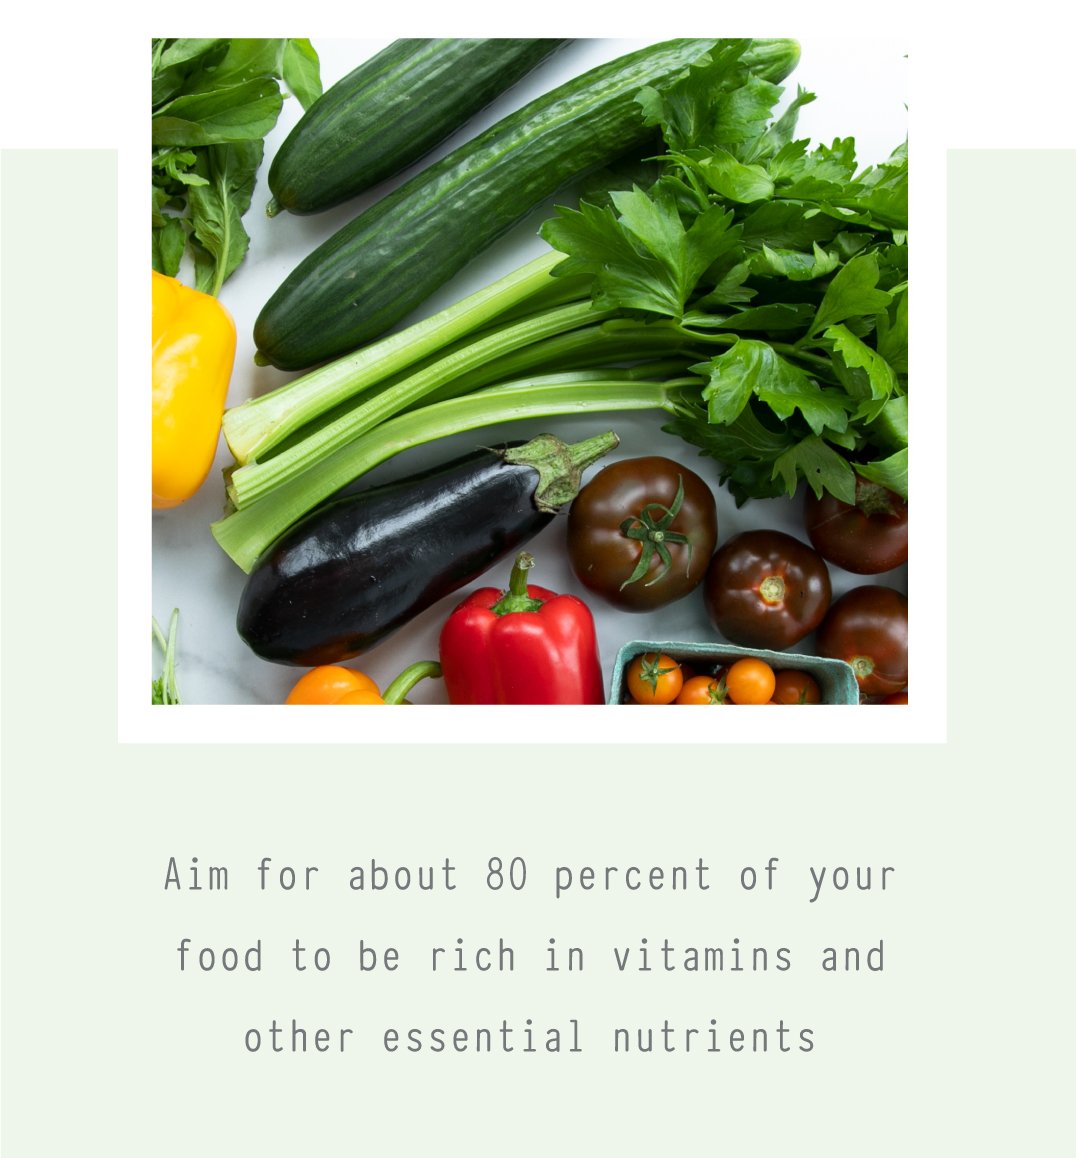 Aim for about 80 percent of your food to be rich in vitamins and other essential nutrients